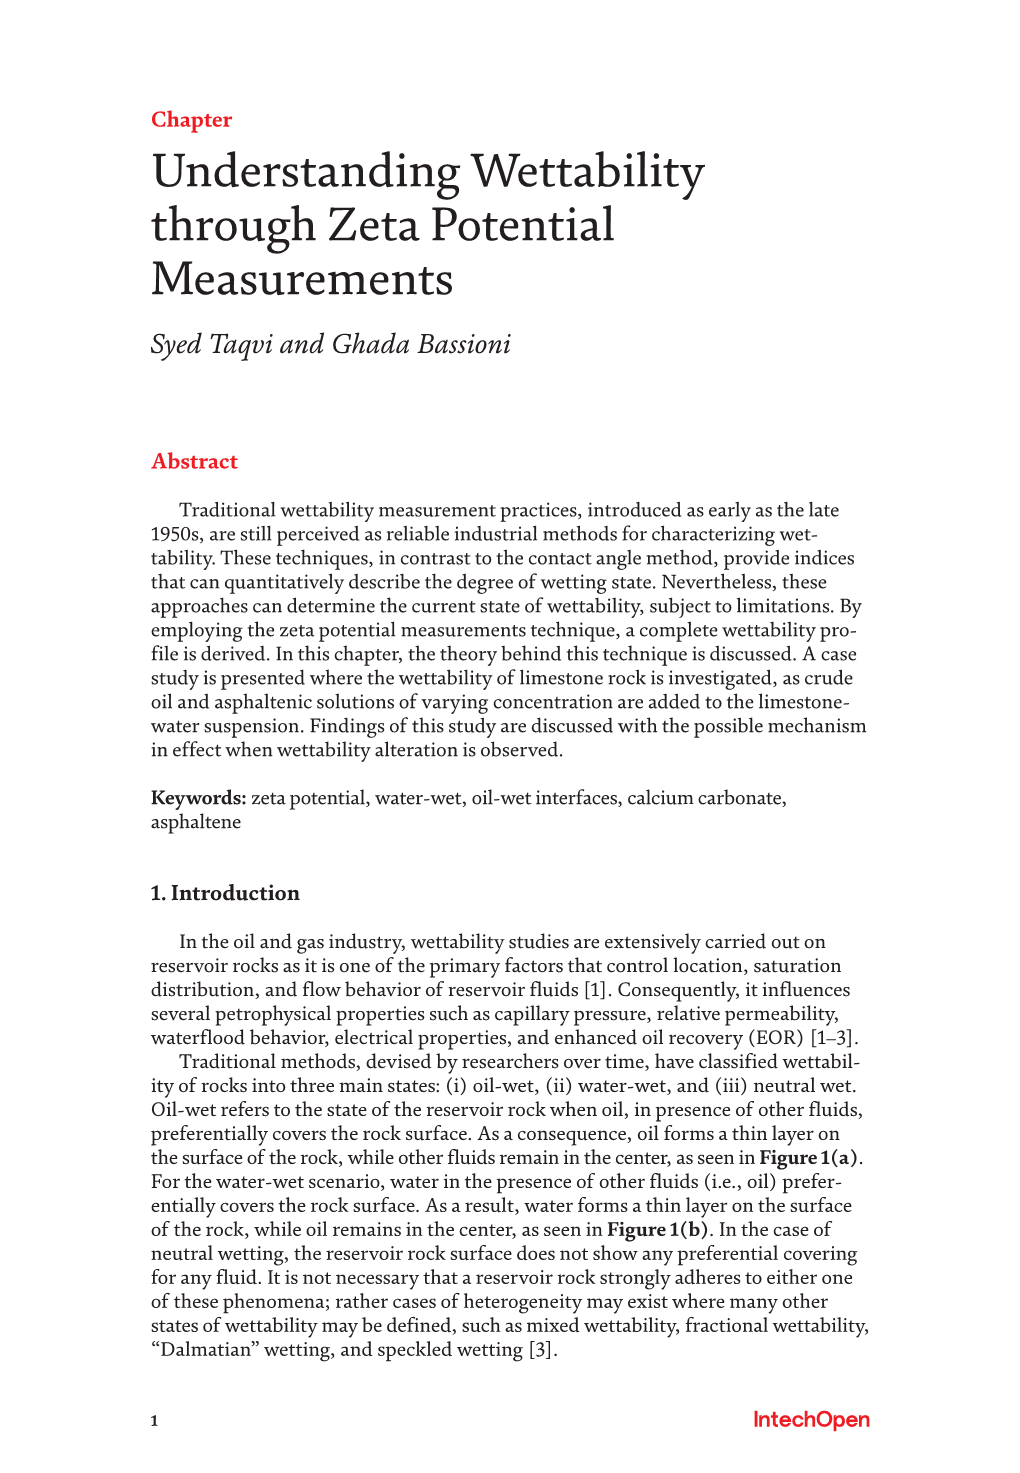 Understanding Wettability Through Zeta Potential Measurements Syed Taqvi and Ghada Bassioni